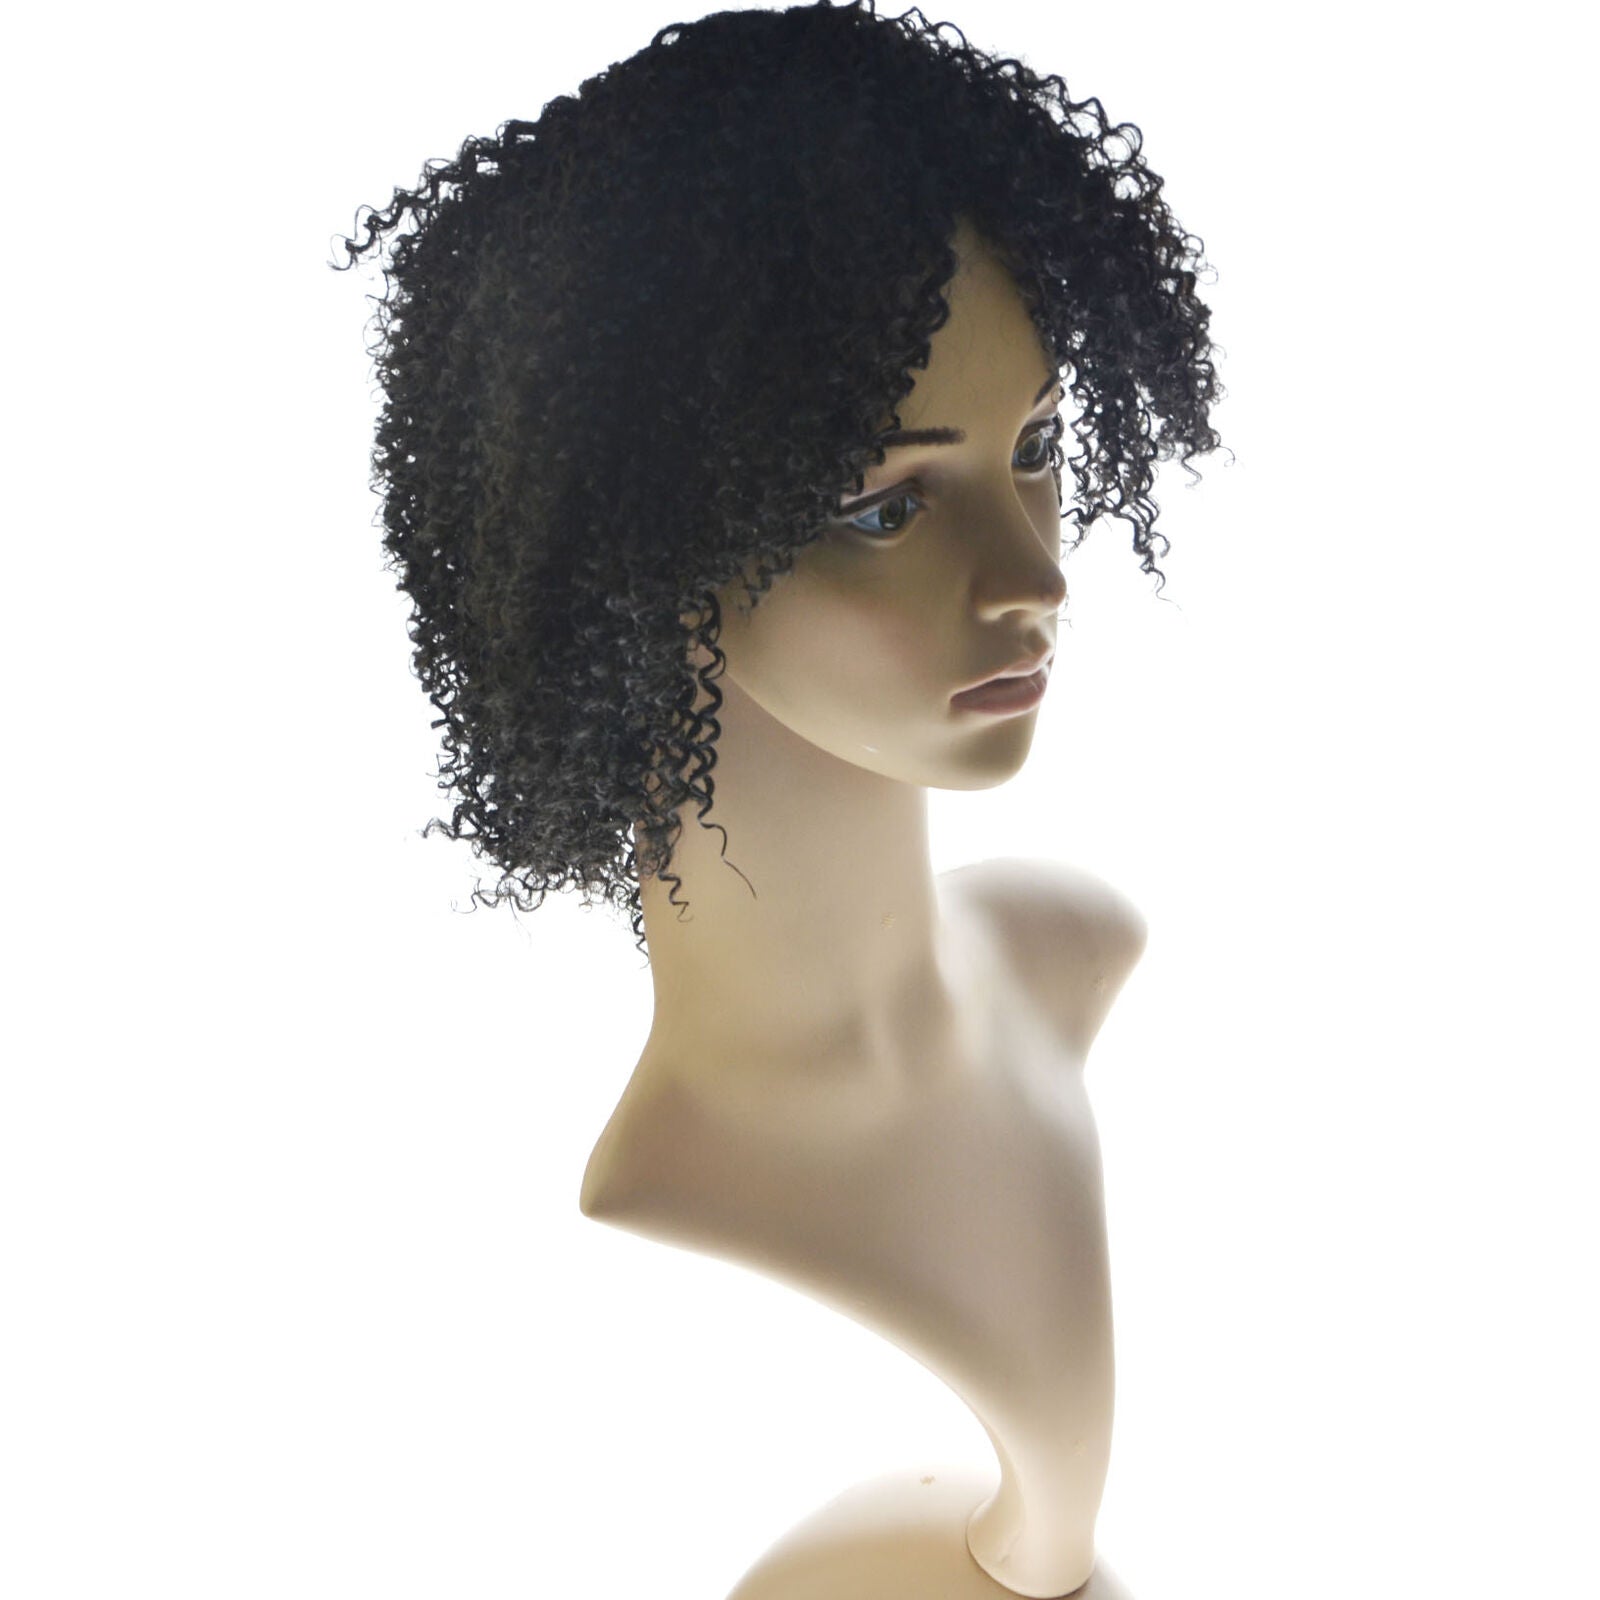 Black Synthetic Curly Wigs for Women Short Afro Wig African American Natural